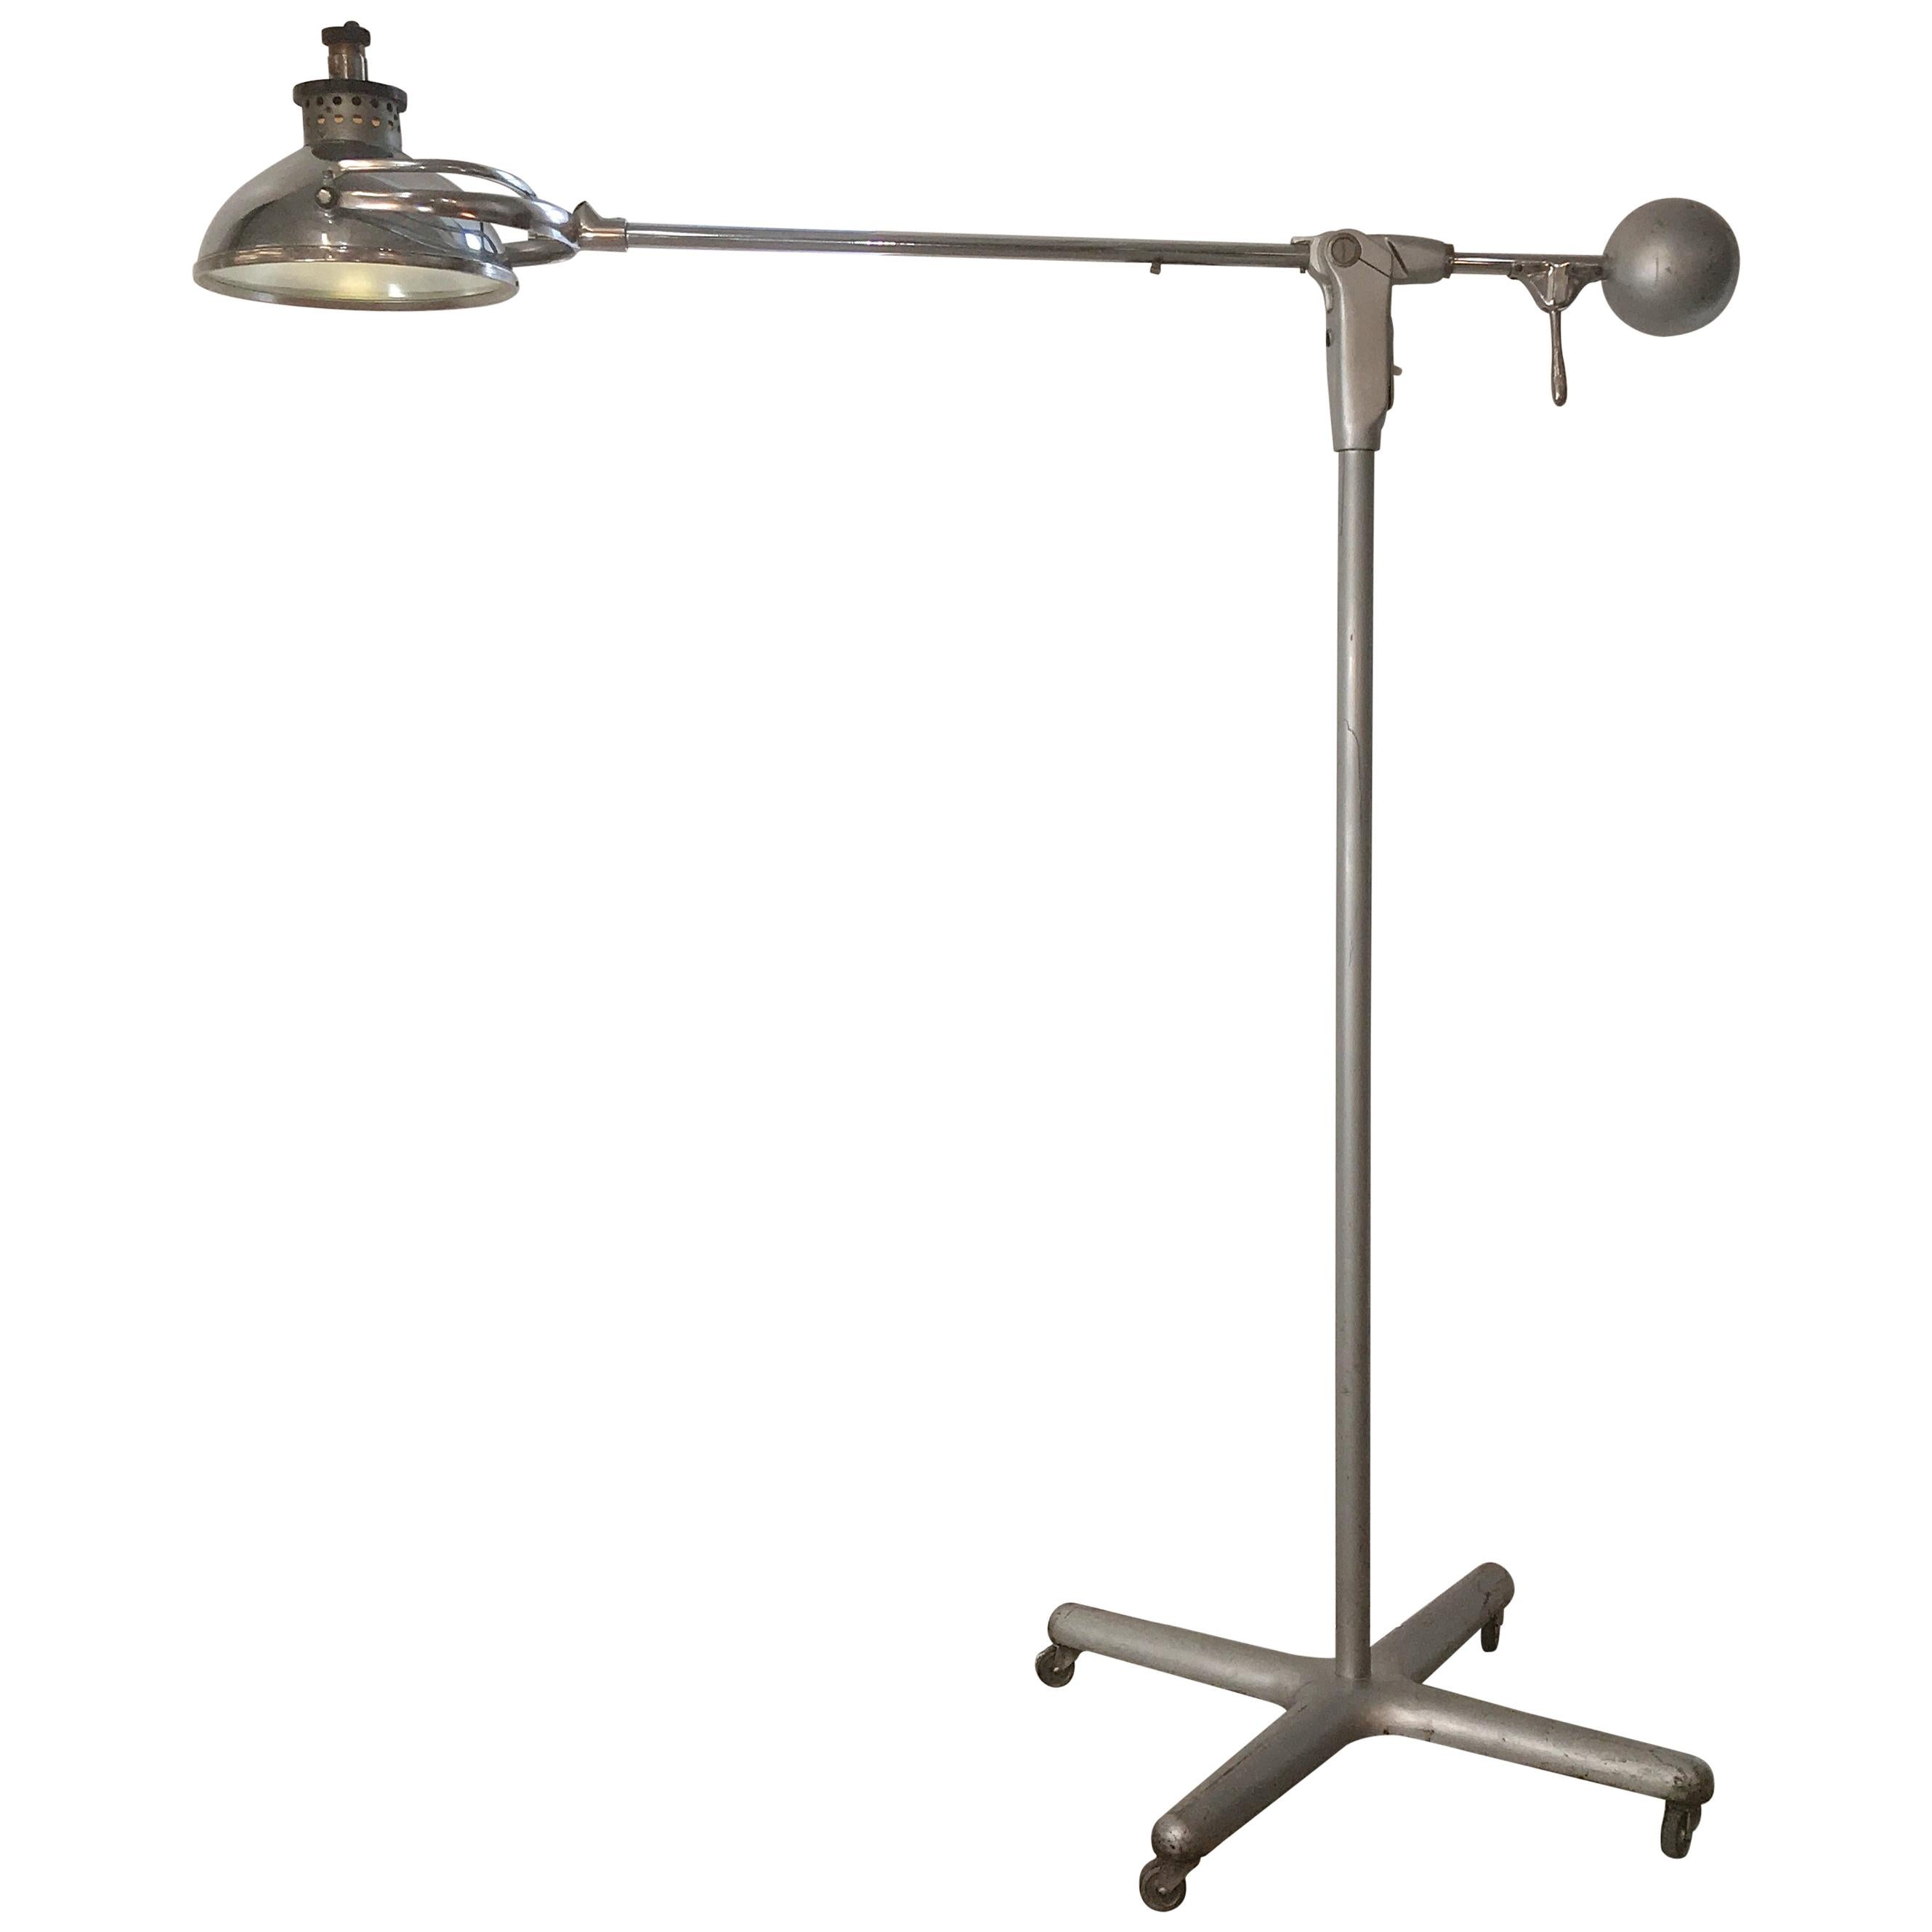 1940s Wilmot Castle Articulating Counterbalance Surgical Lamp